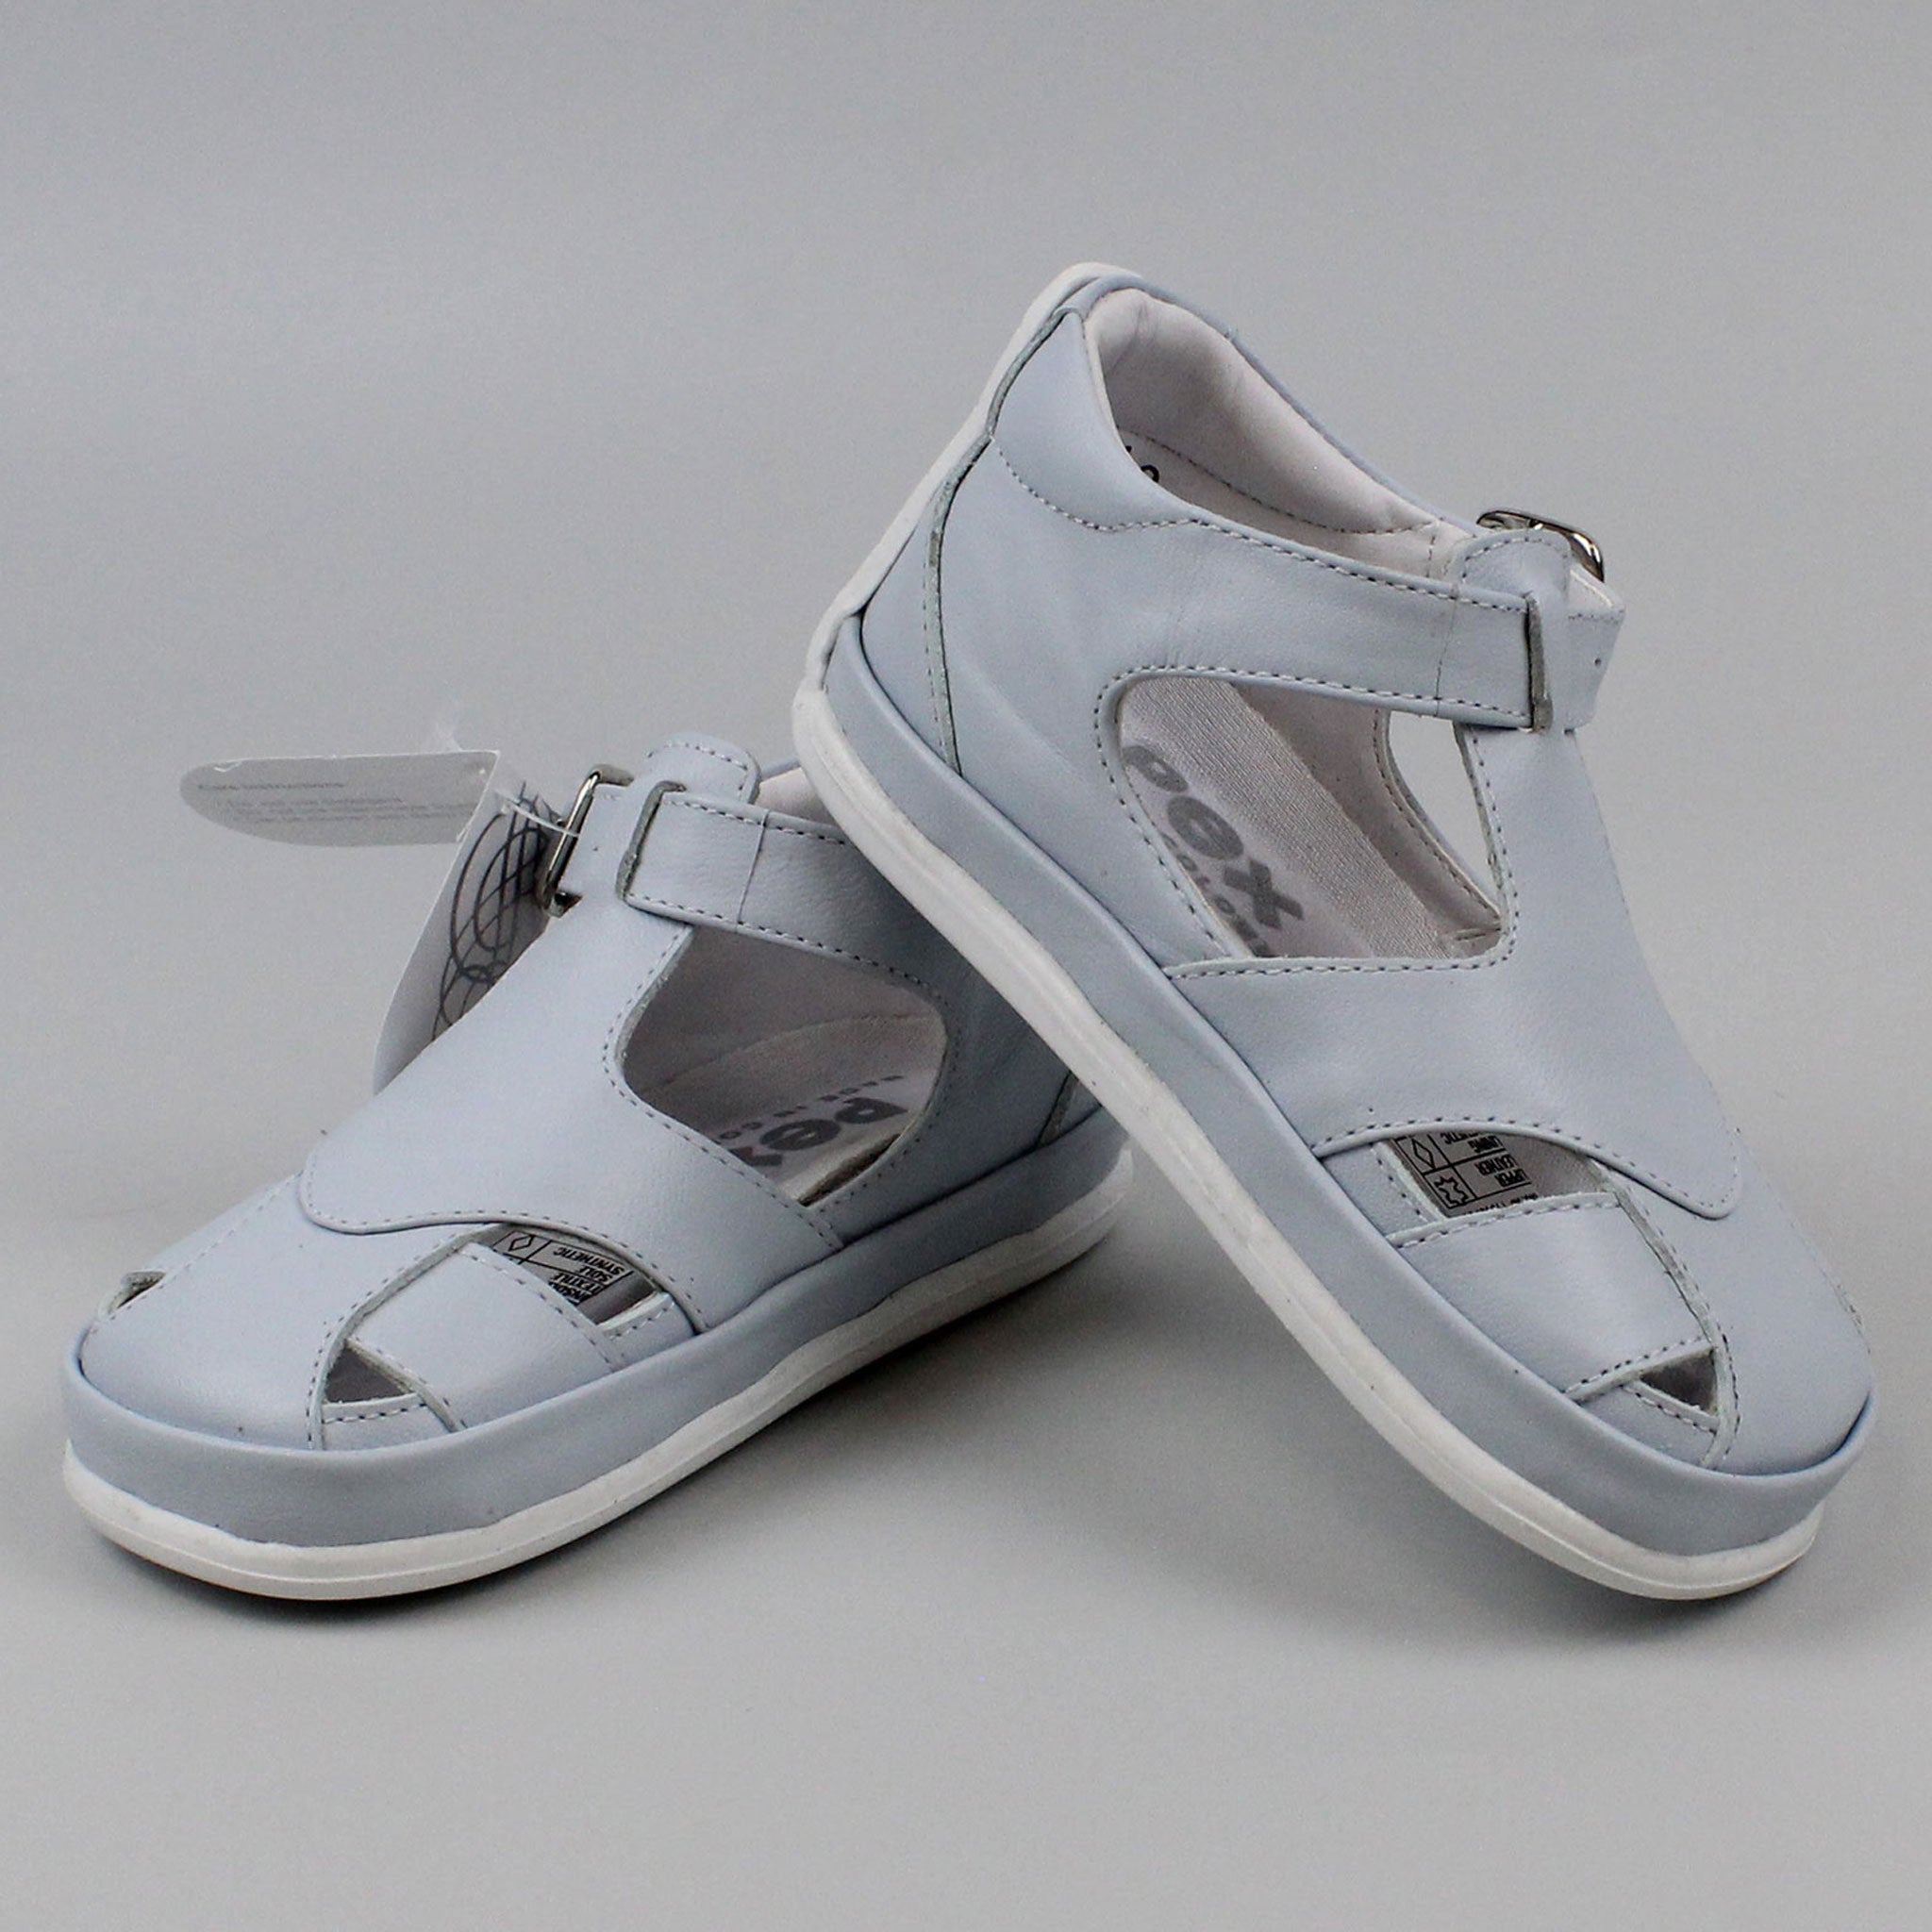 Old Soles - Blue Leather Baby Sandals | Childrensalon Outlet